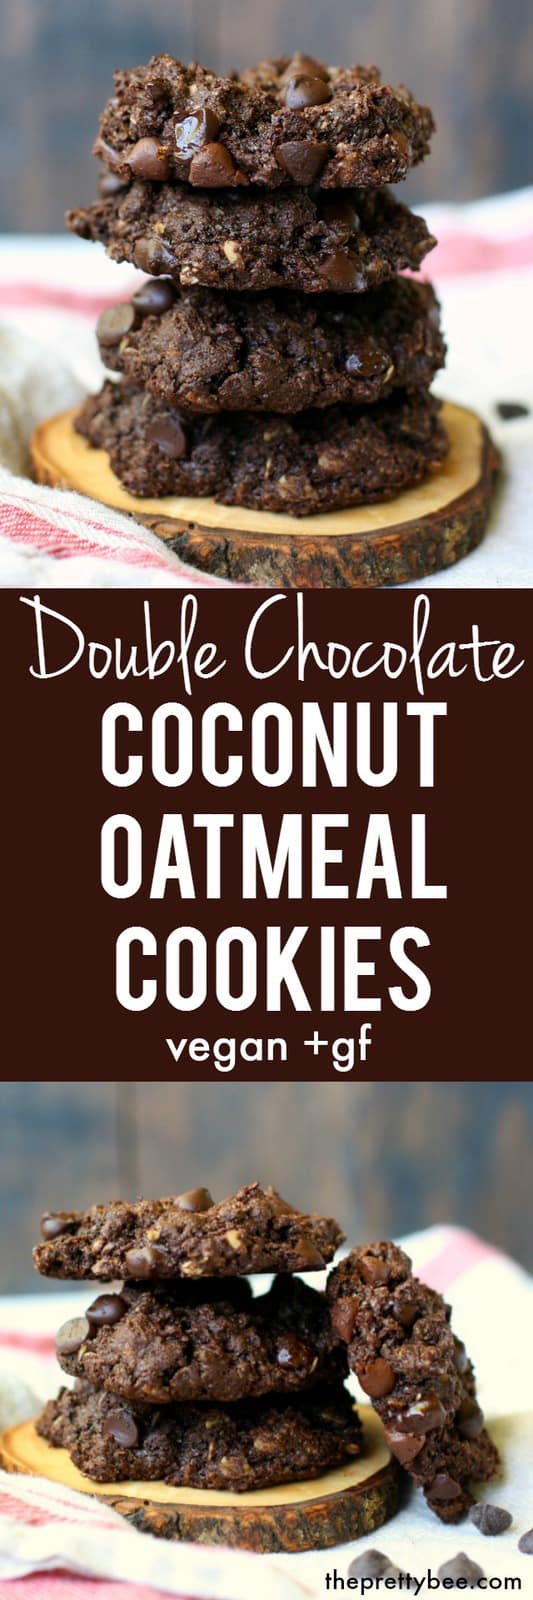 Double Chocolate Coconut Oatmeal Cookies. - The Pretty Bee